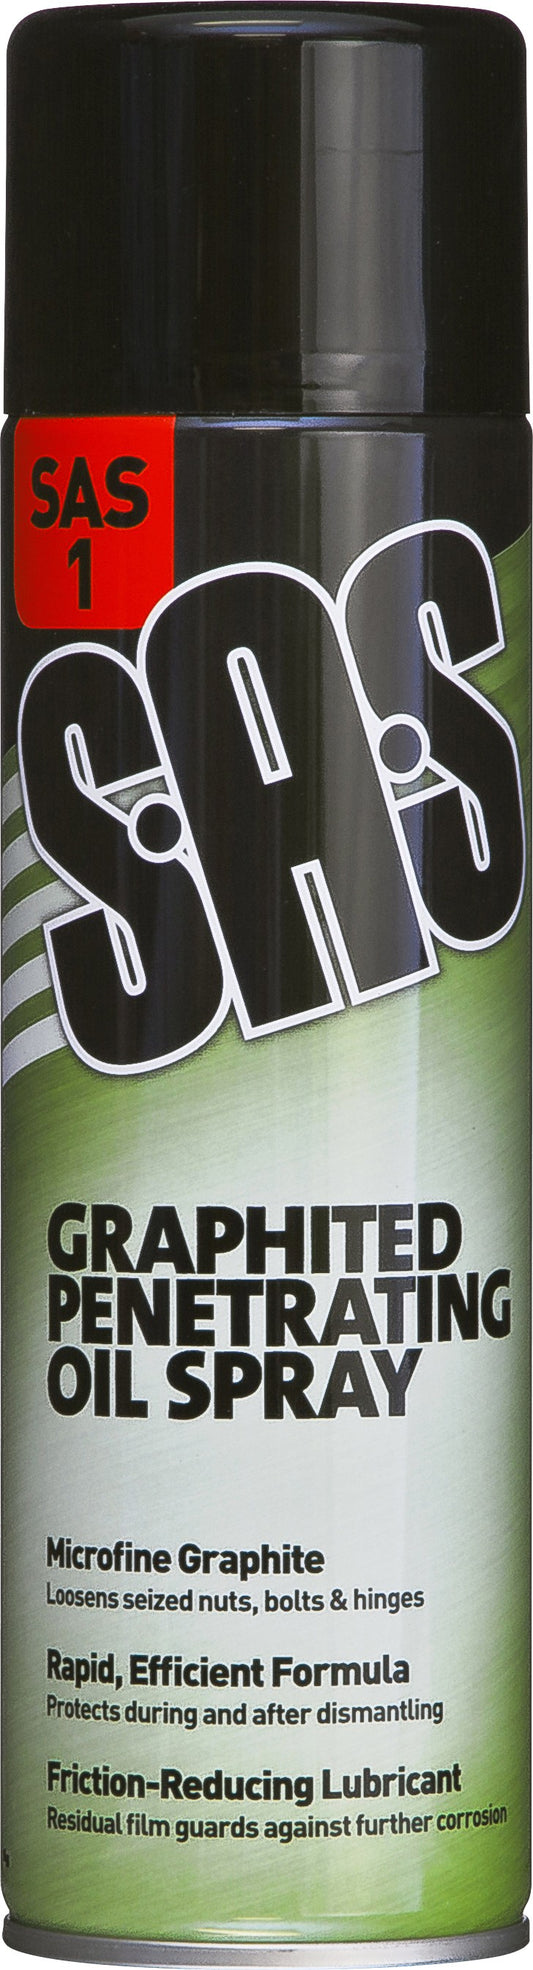 S.A.S Graphited Penetration Oil 500ml